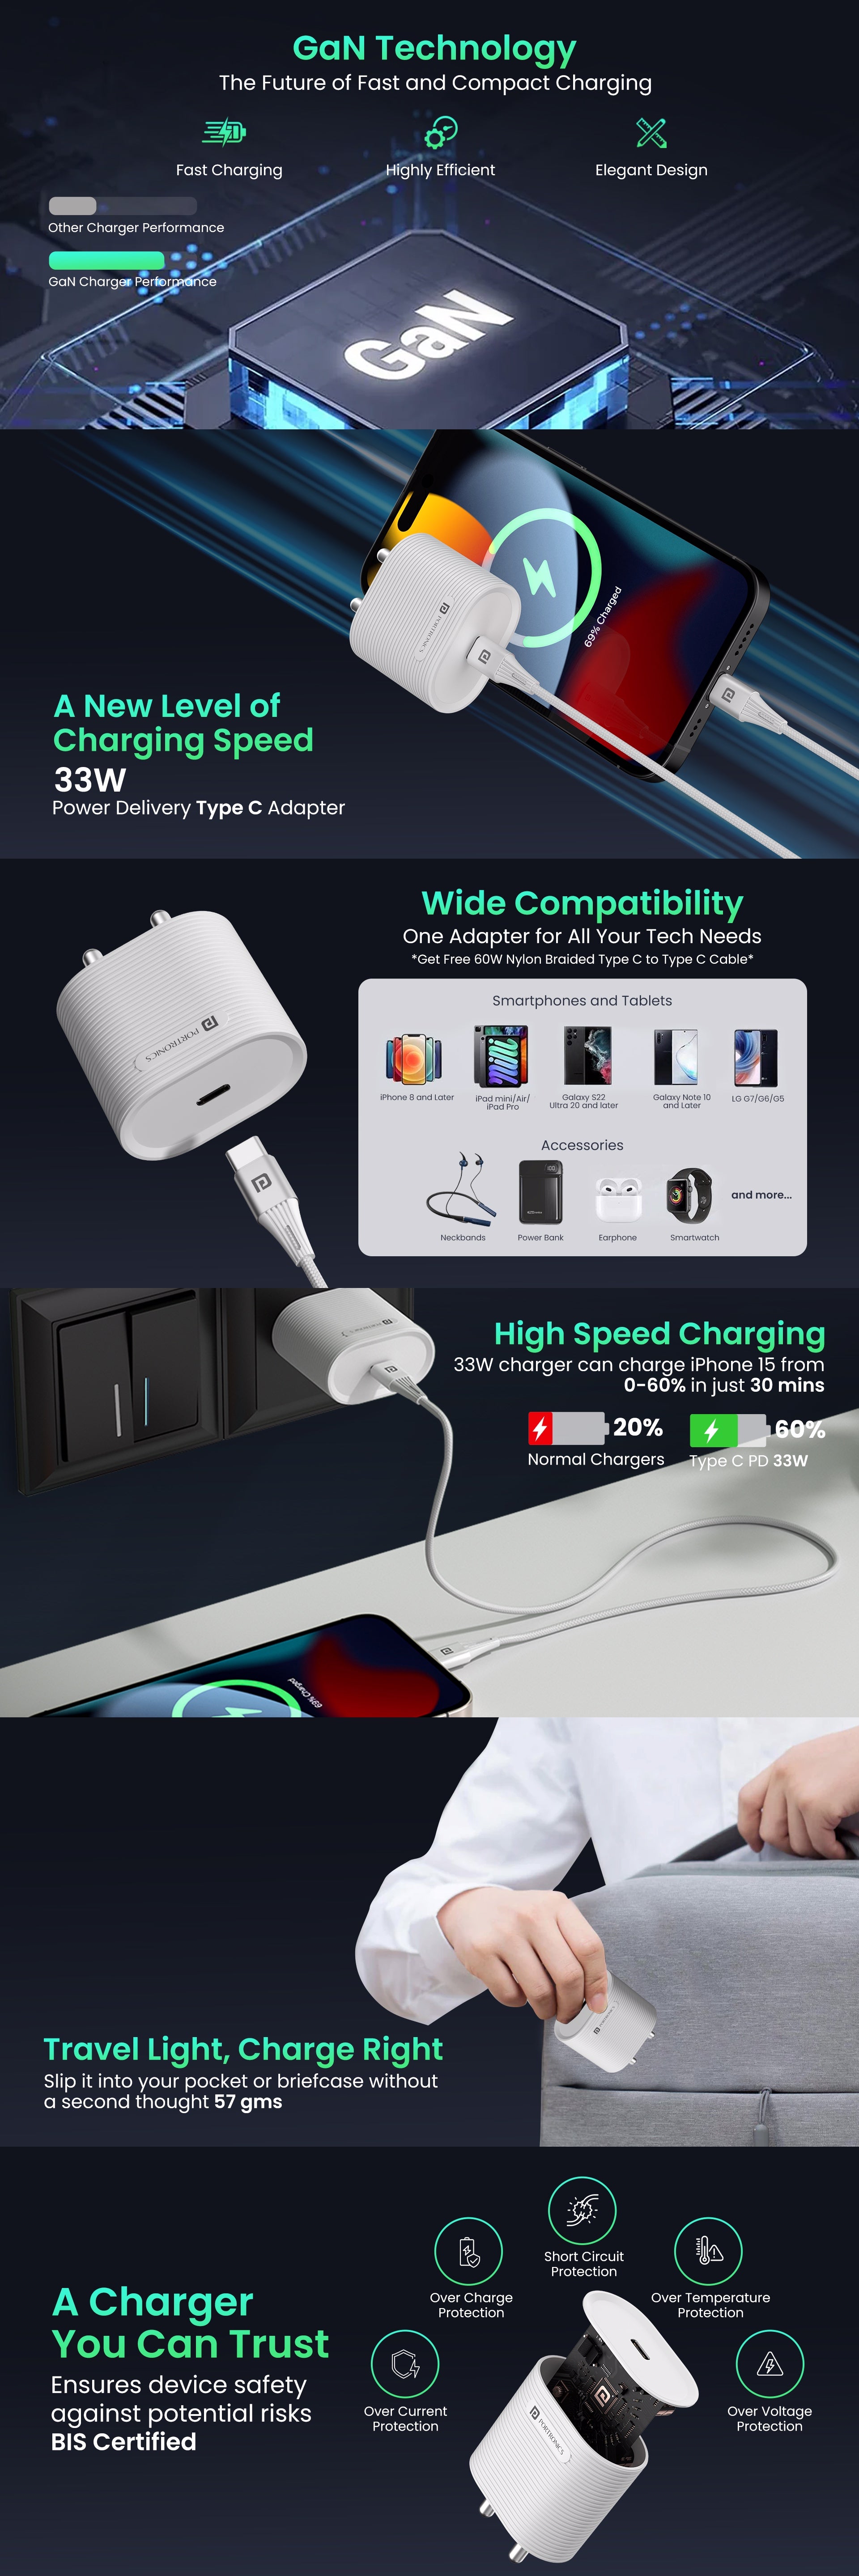 Portronics Adapto  33G Plus 33w Gan Power Adapter fast wall charger